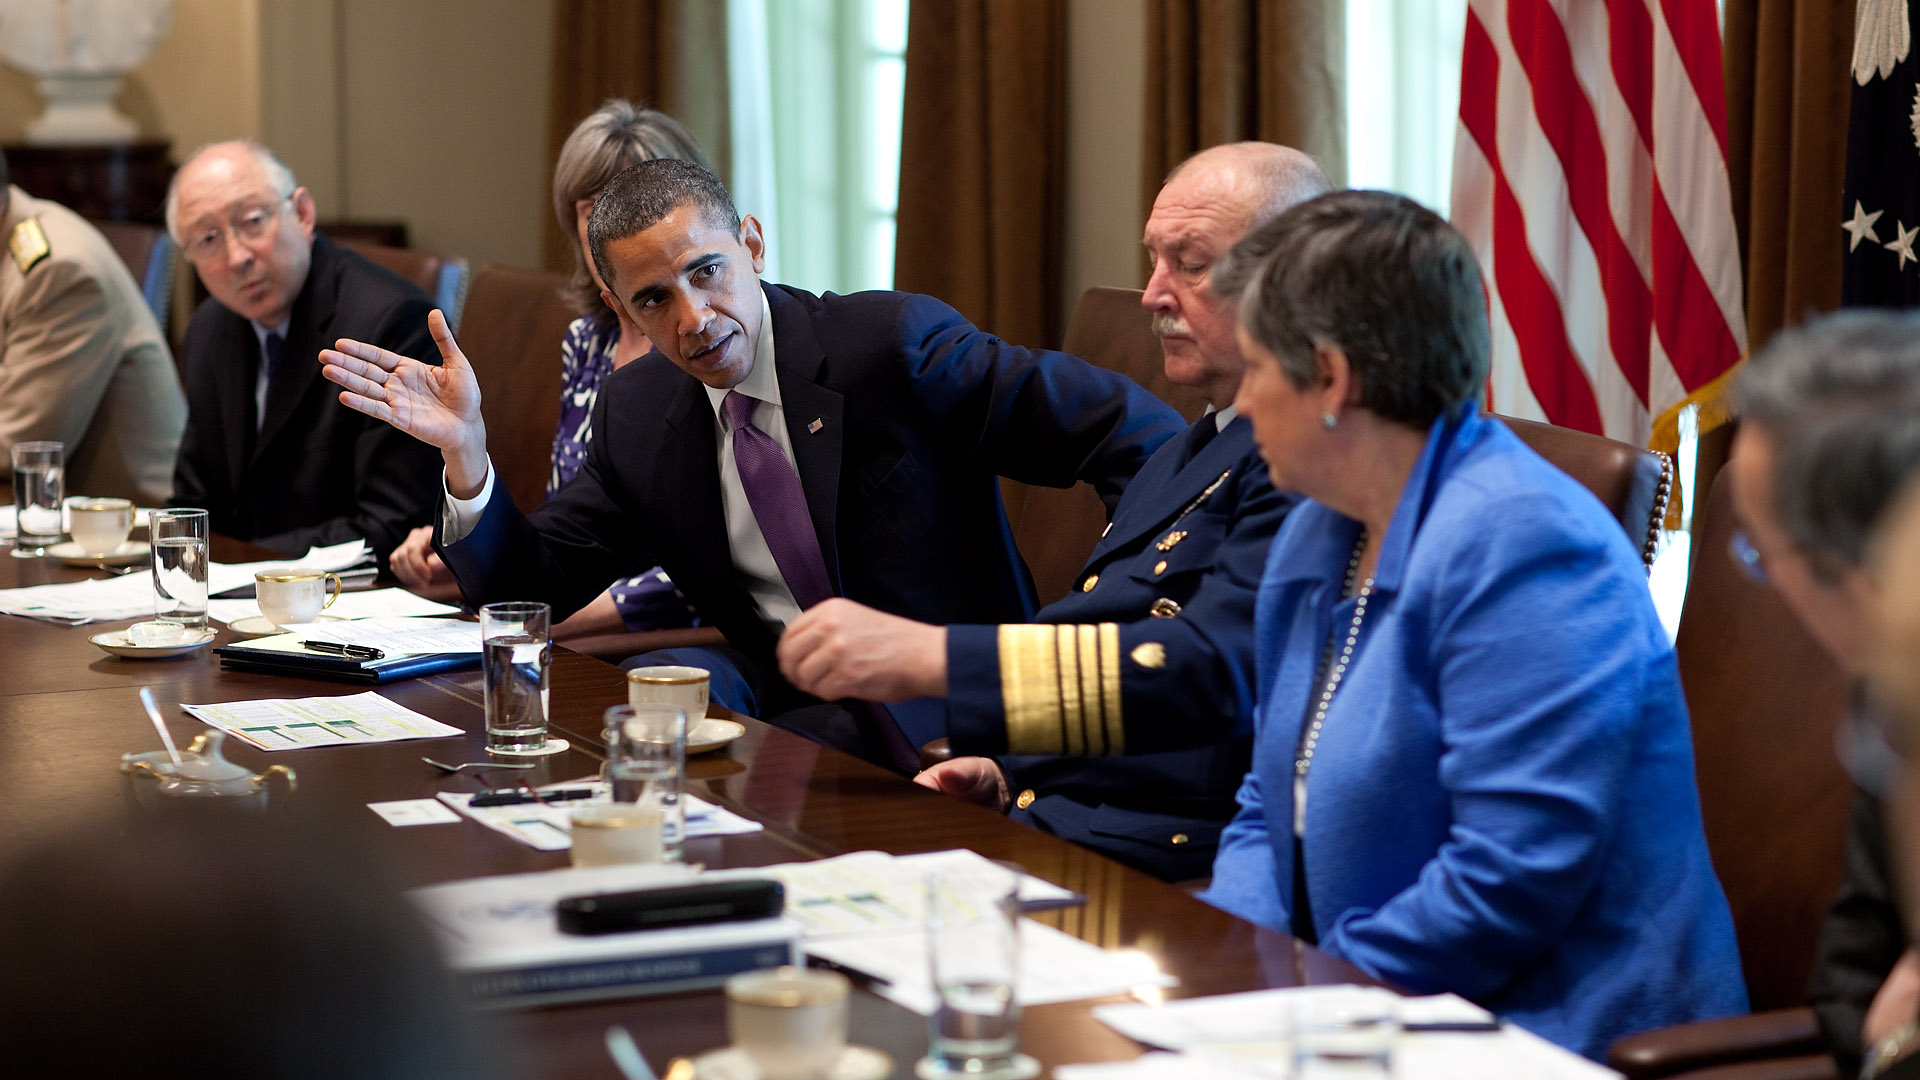 President Barack Obama Meets with Members of his Cabinet on BP Oil Spill